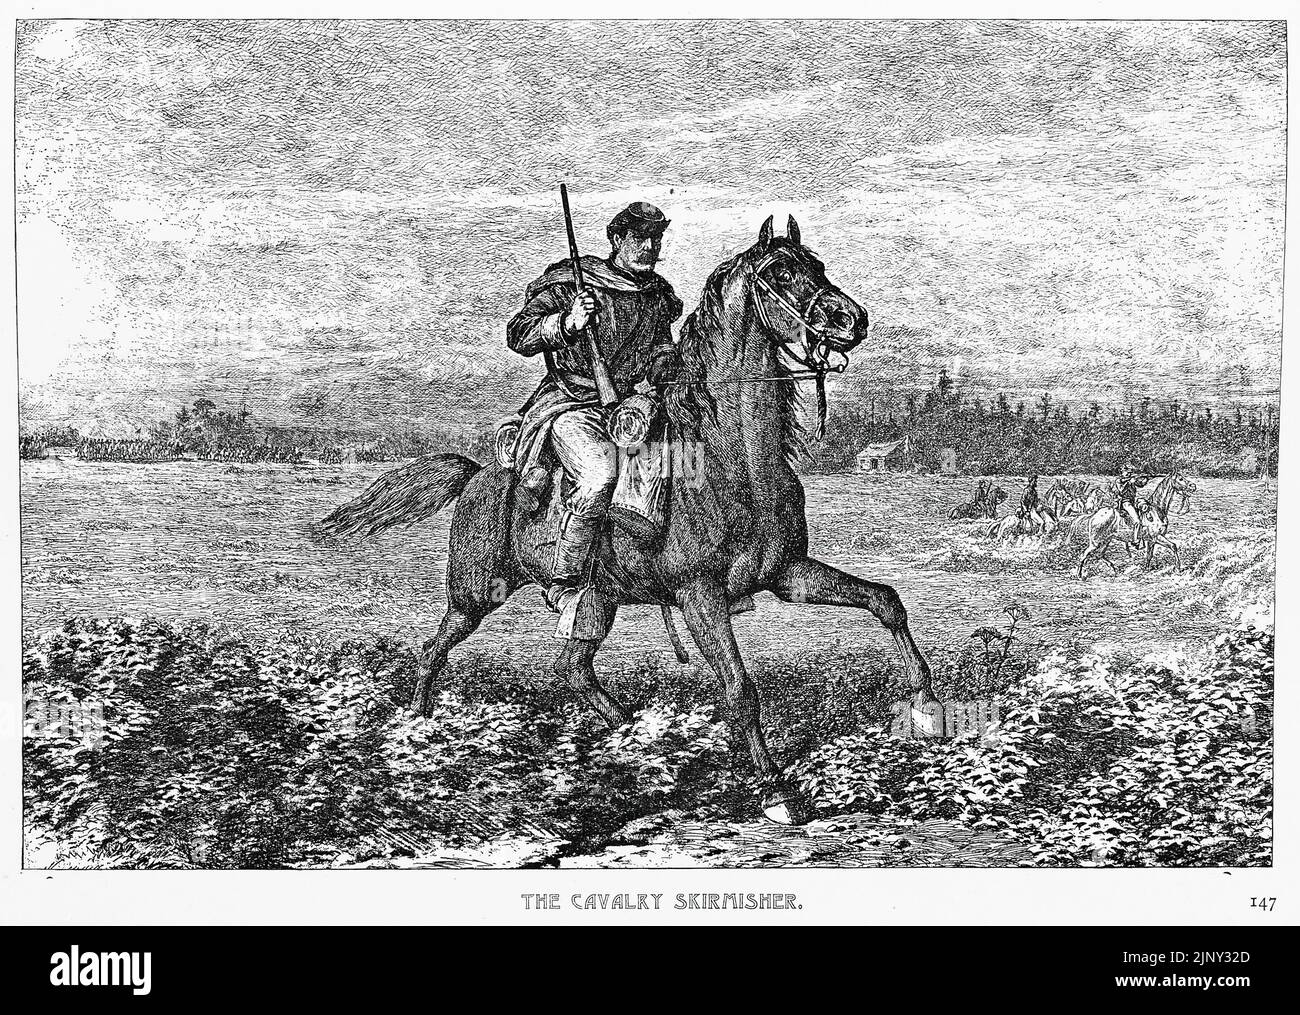 The Cavalry Skirmisher. Union Army. 19th century American Civil War illustration by Edwin Forbes Stock Photo